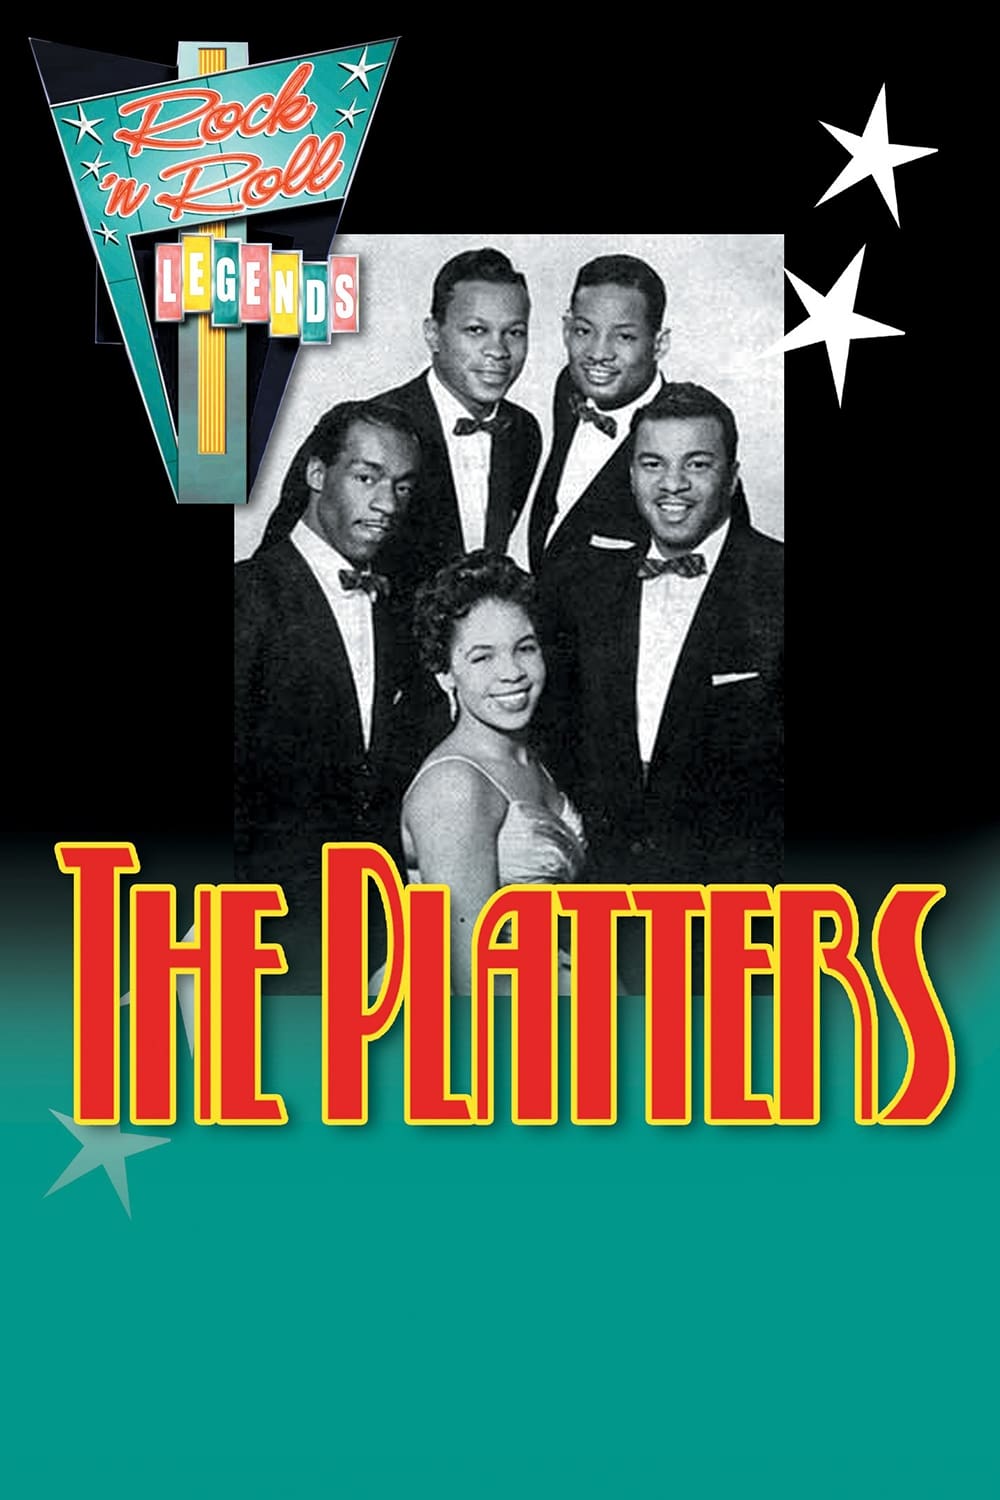 The Platters with the Crickets & Lenny Welch